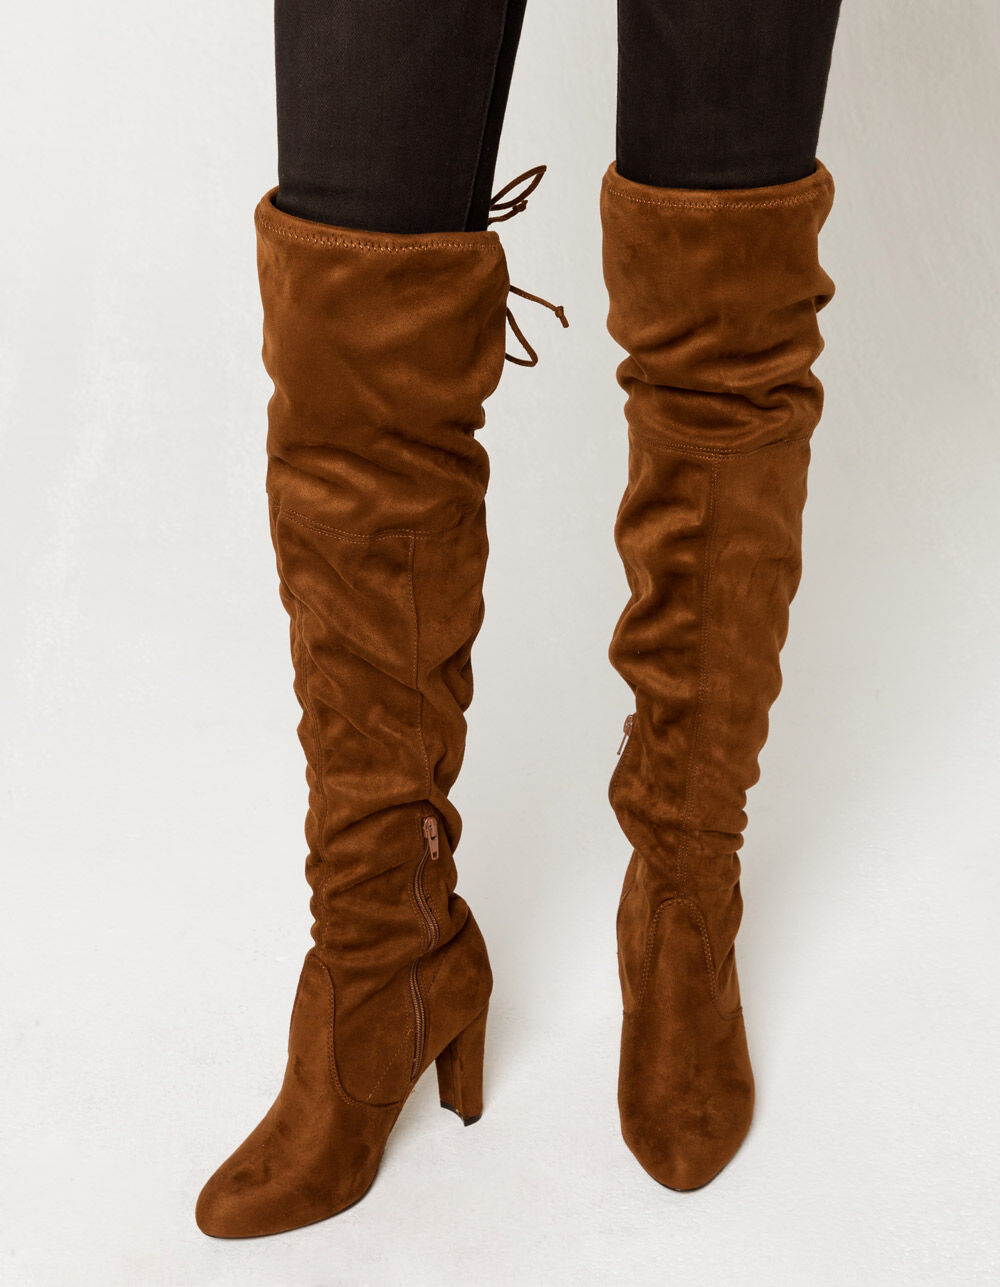 WILD DIVA Over The Knee Heeled Brown Womens Boots - BROWN | Tillys